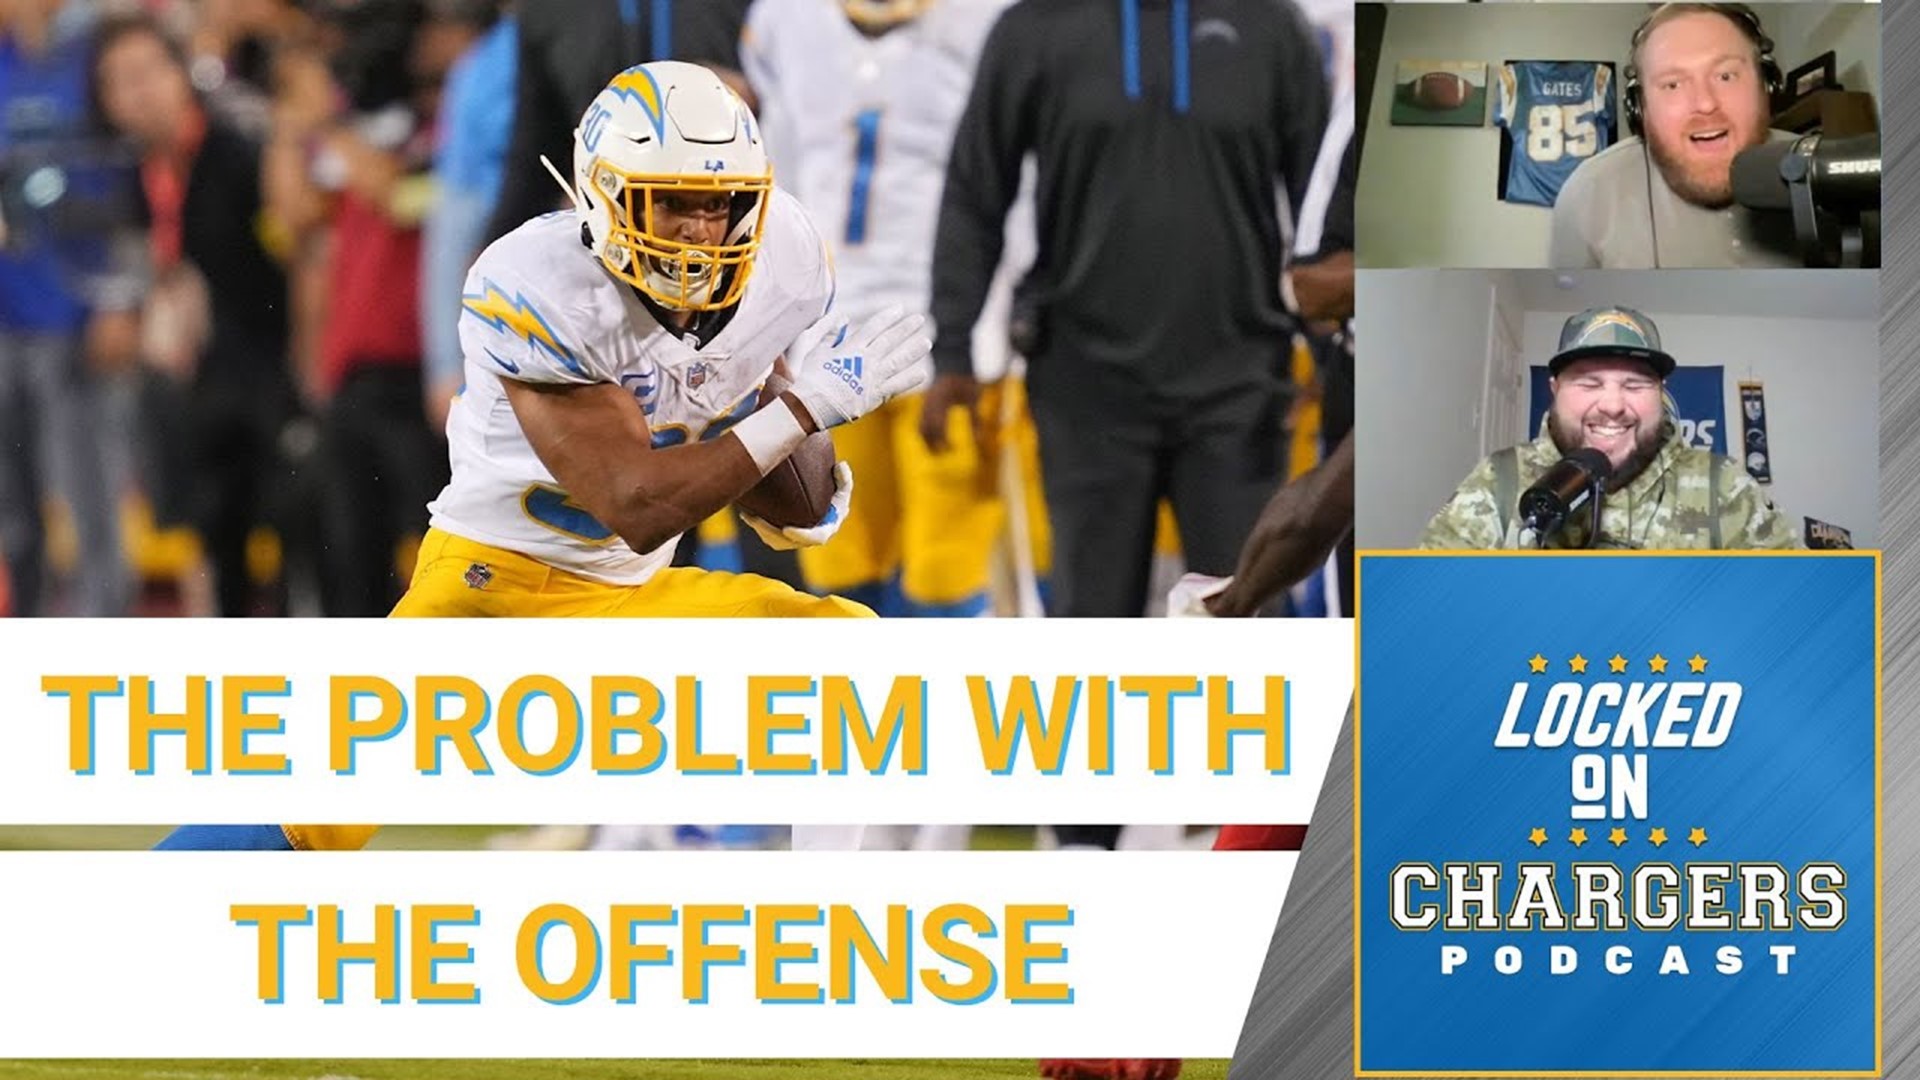 The Chargers offense should be a juggernaut with Justin Herbert at quarterback but they have underwhelmed at times early on. The guys discuss.